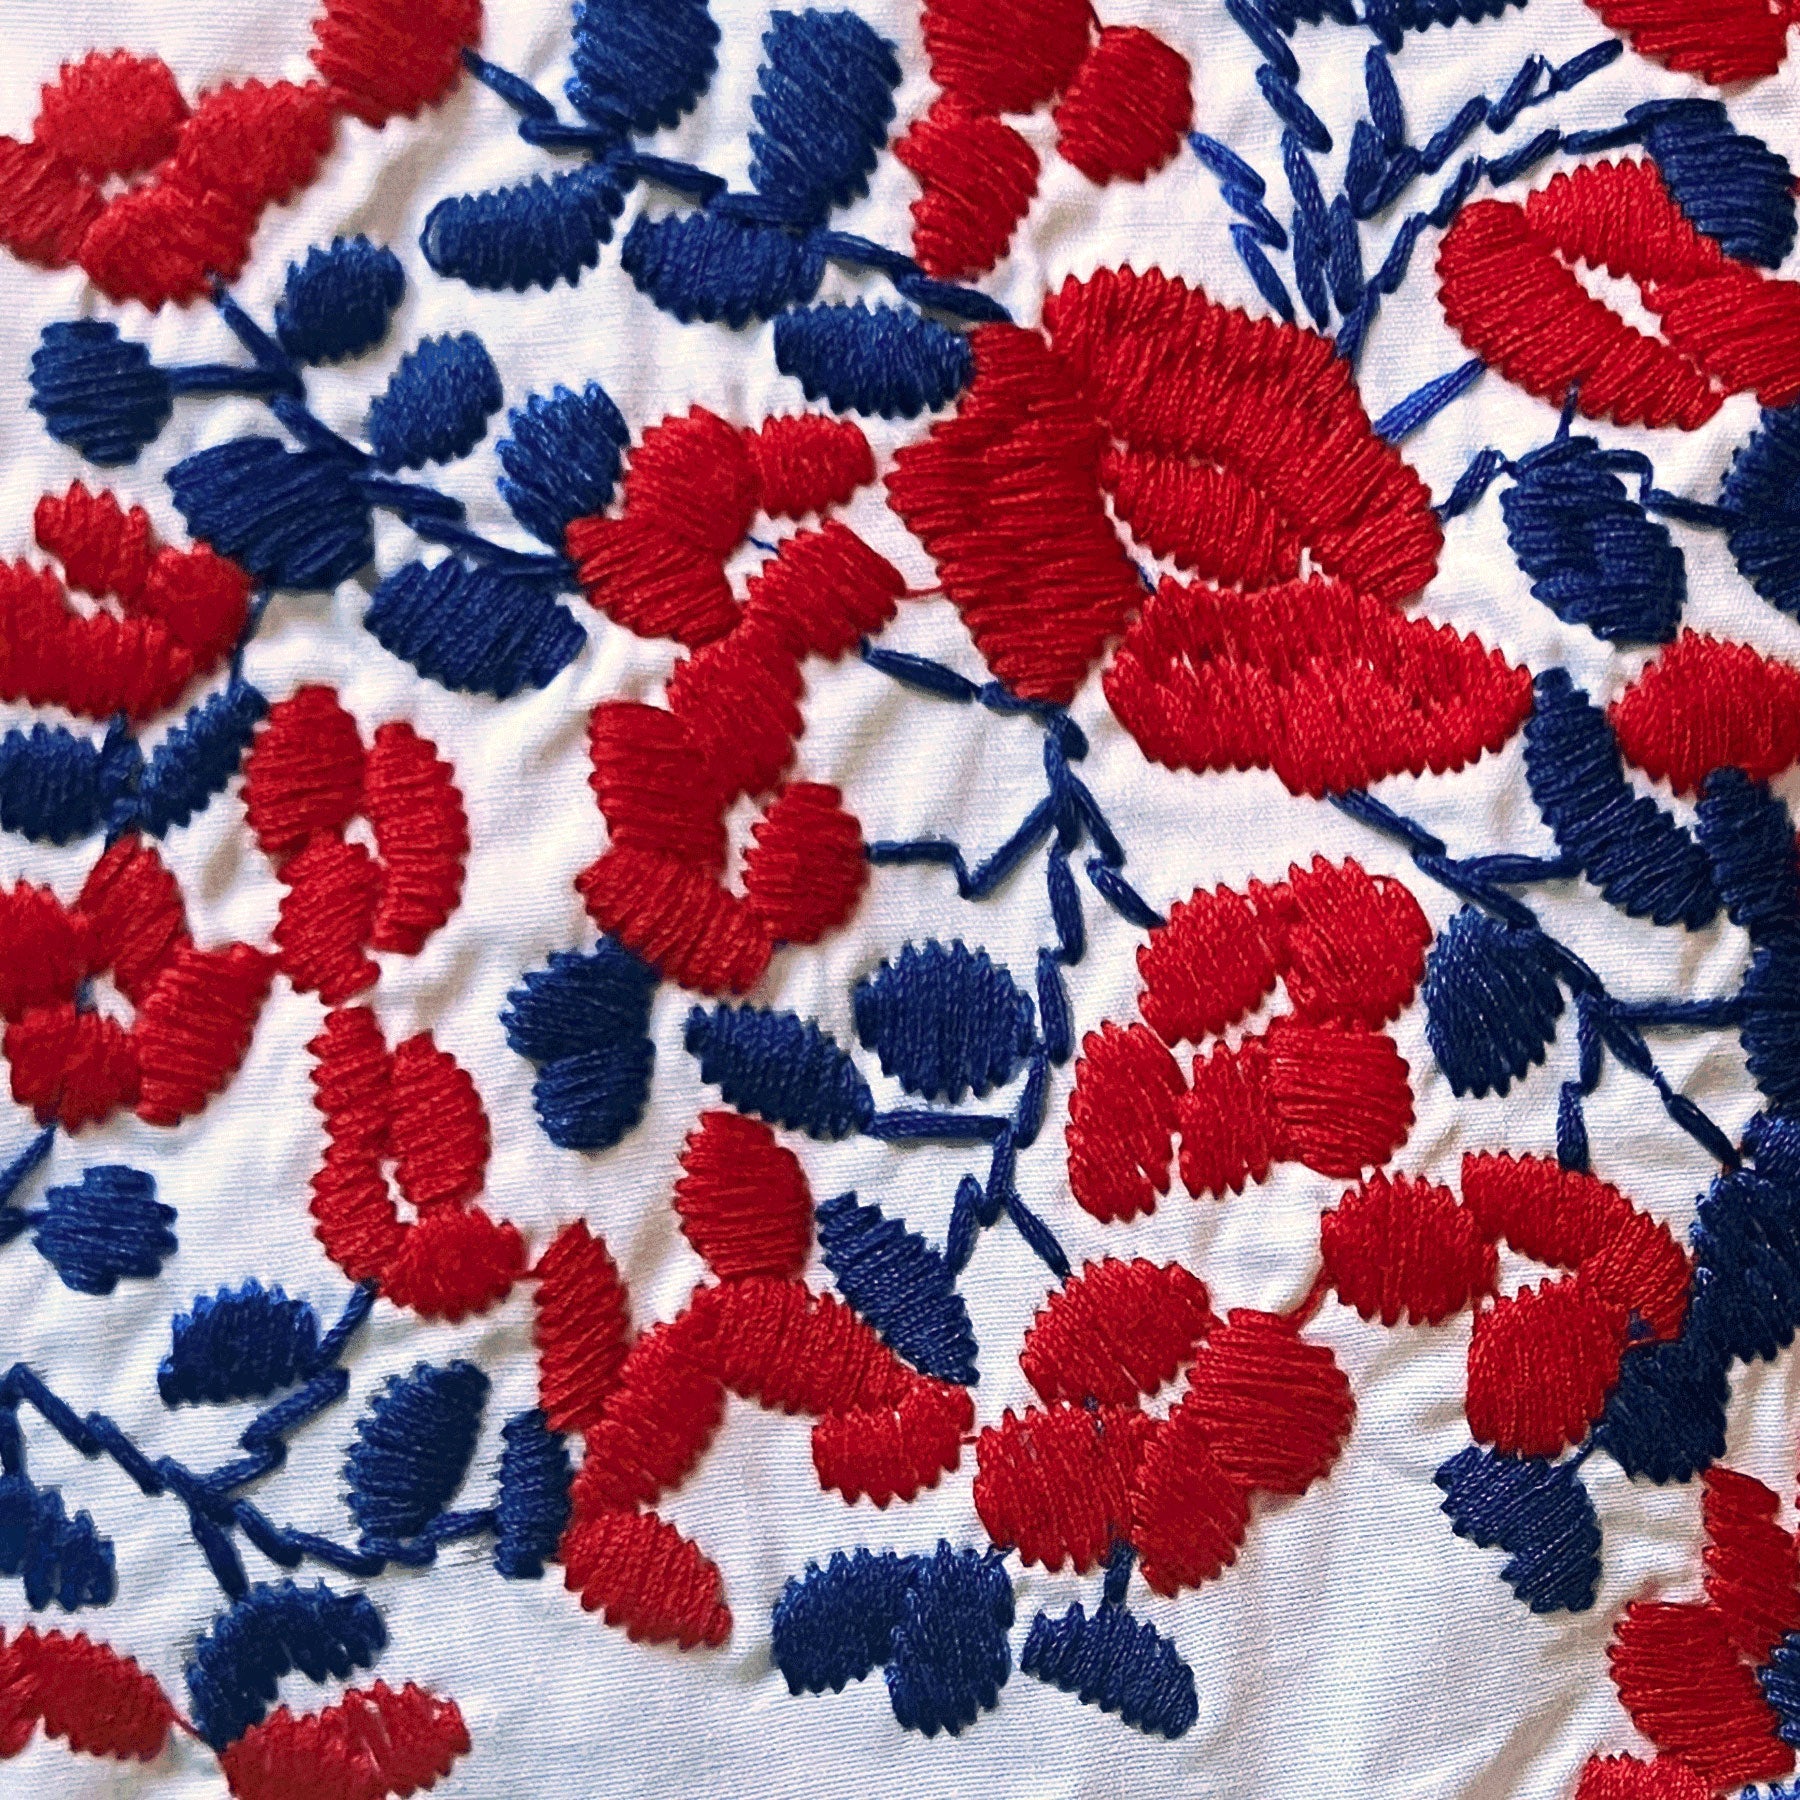 PRE-ORDER: Fourth of July White Hummingbird Blouse (mid-June delivery)